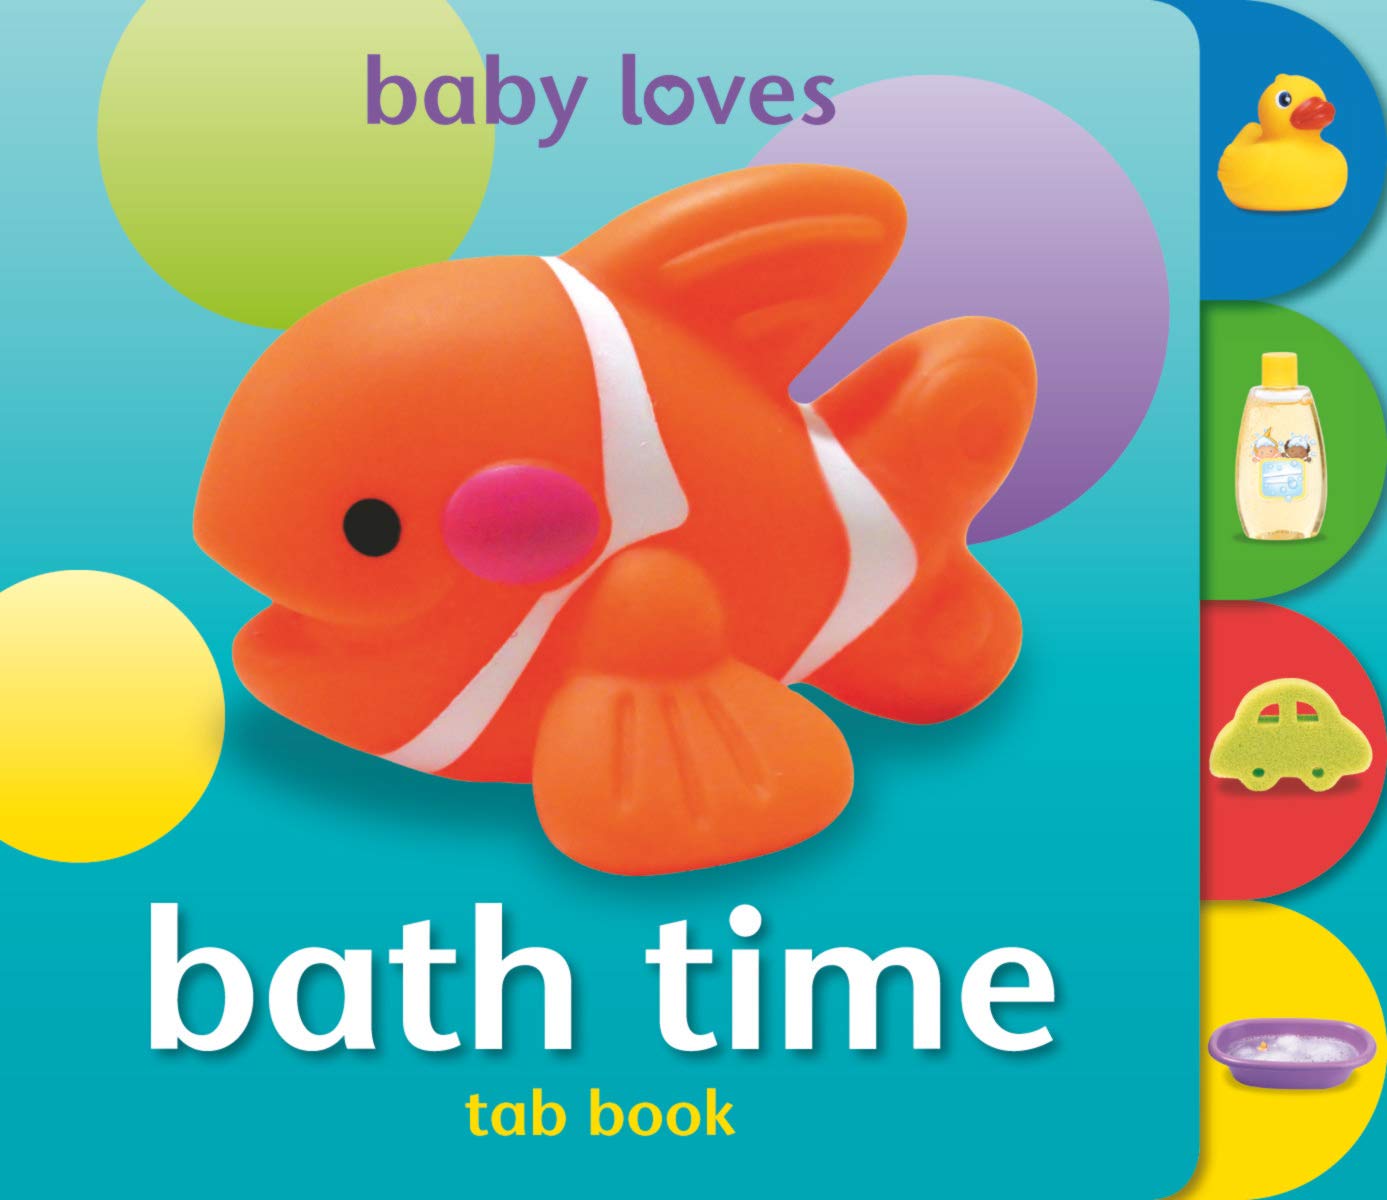 Baby Loves: Bath time